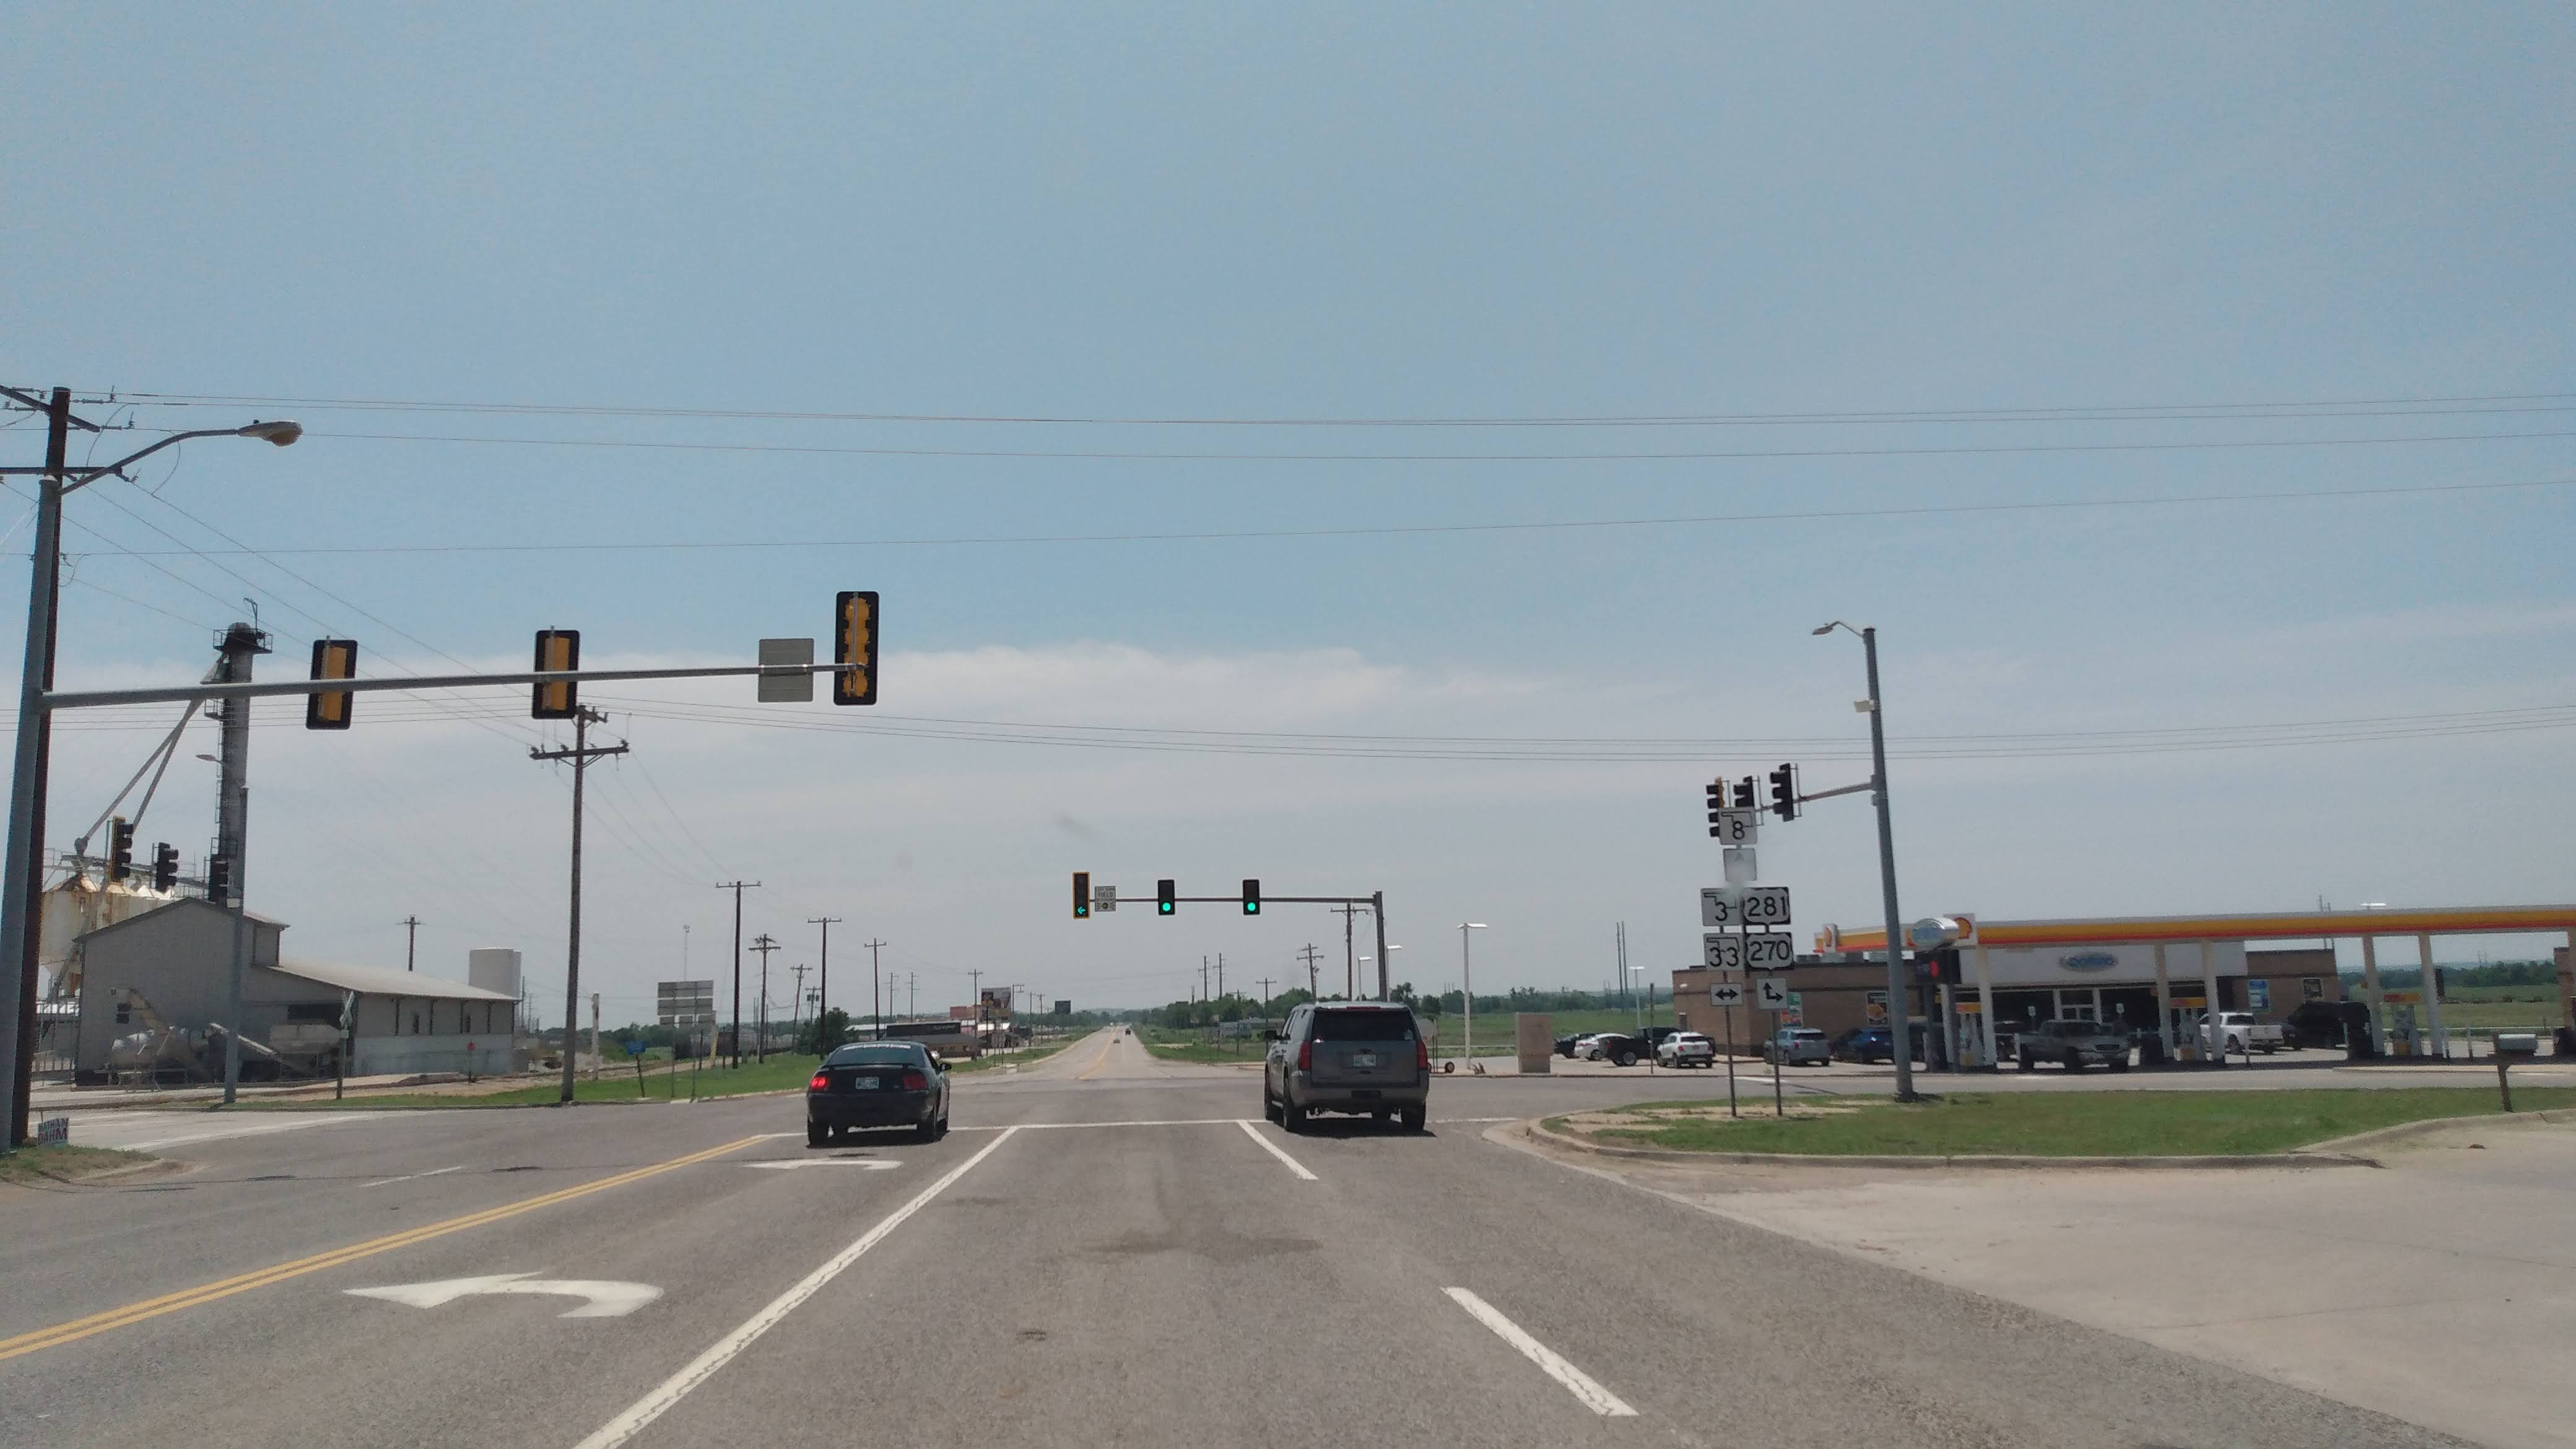 The SH-8, SH-33, SH-3, US-270, and US-281 intersection in Watonga, Oklahoma in 2023.